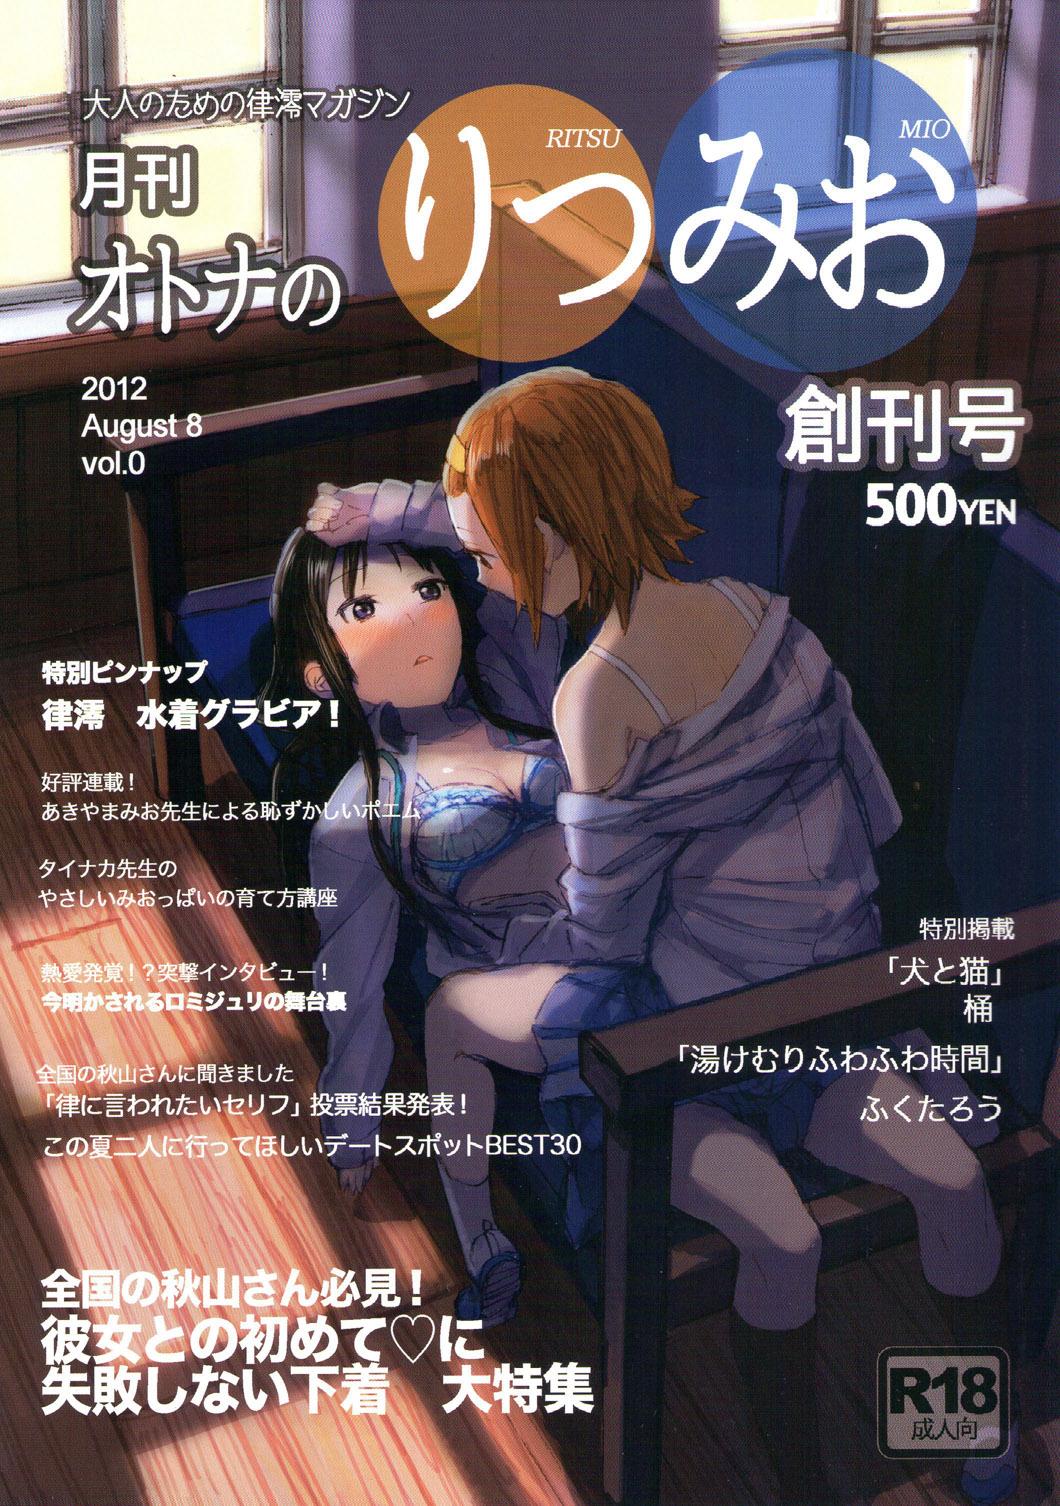 Gekkan Otona no RitsuMio Soukangou | Monthly Issue - First Release of Mio and Ritsu for Adults 0